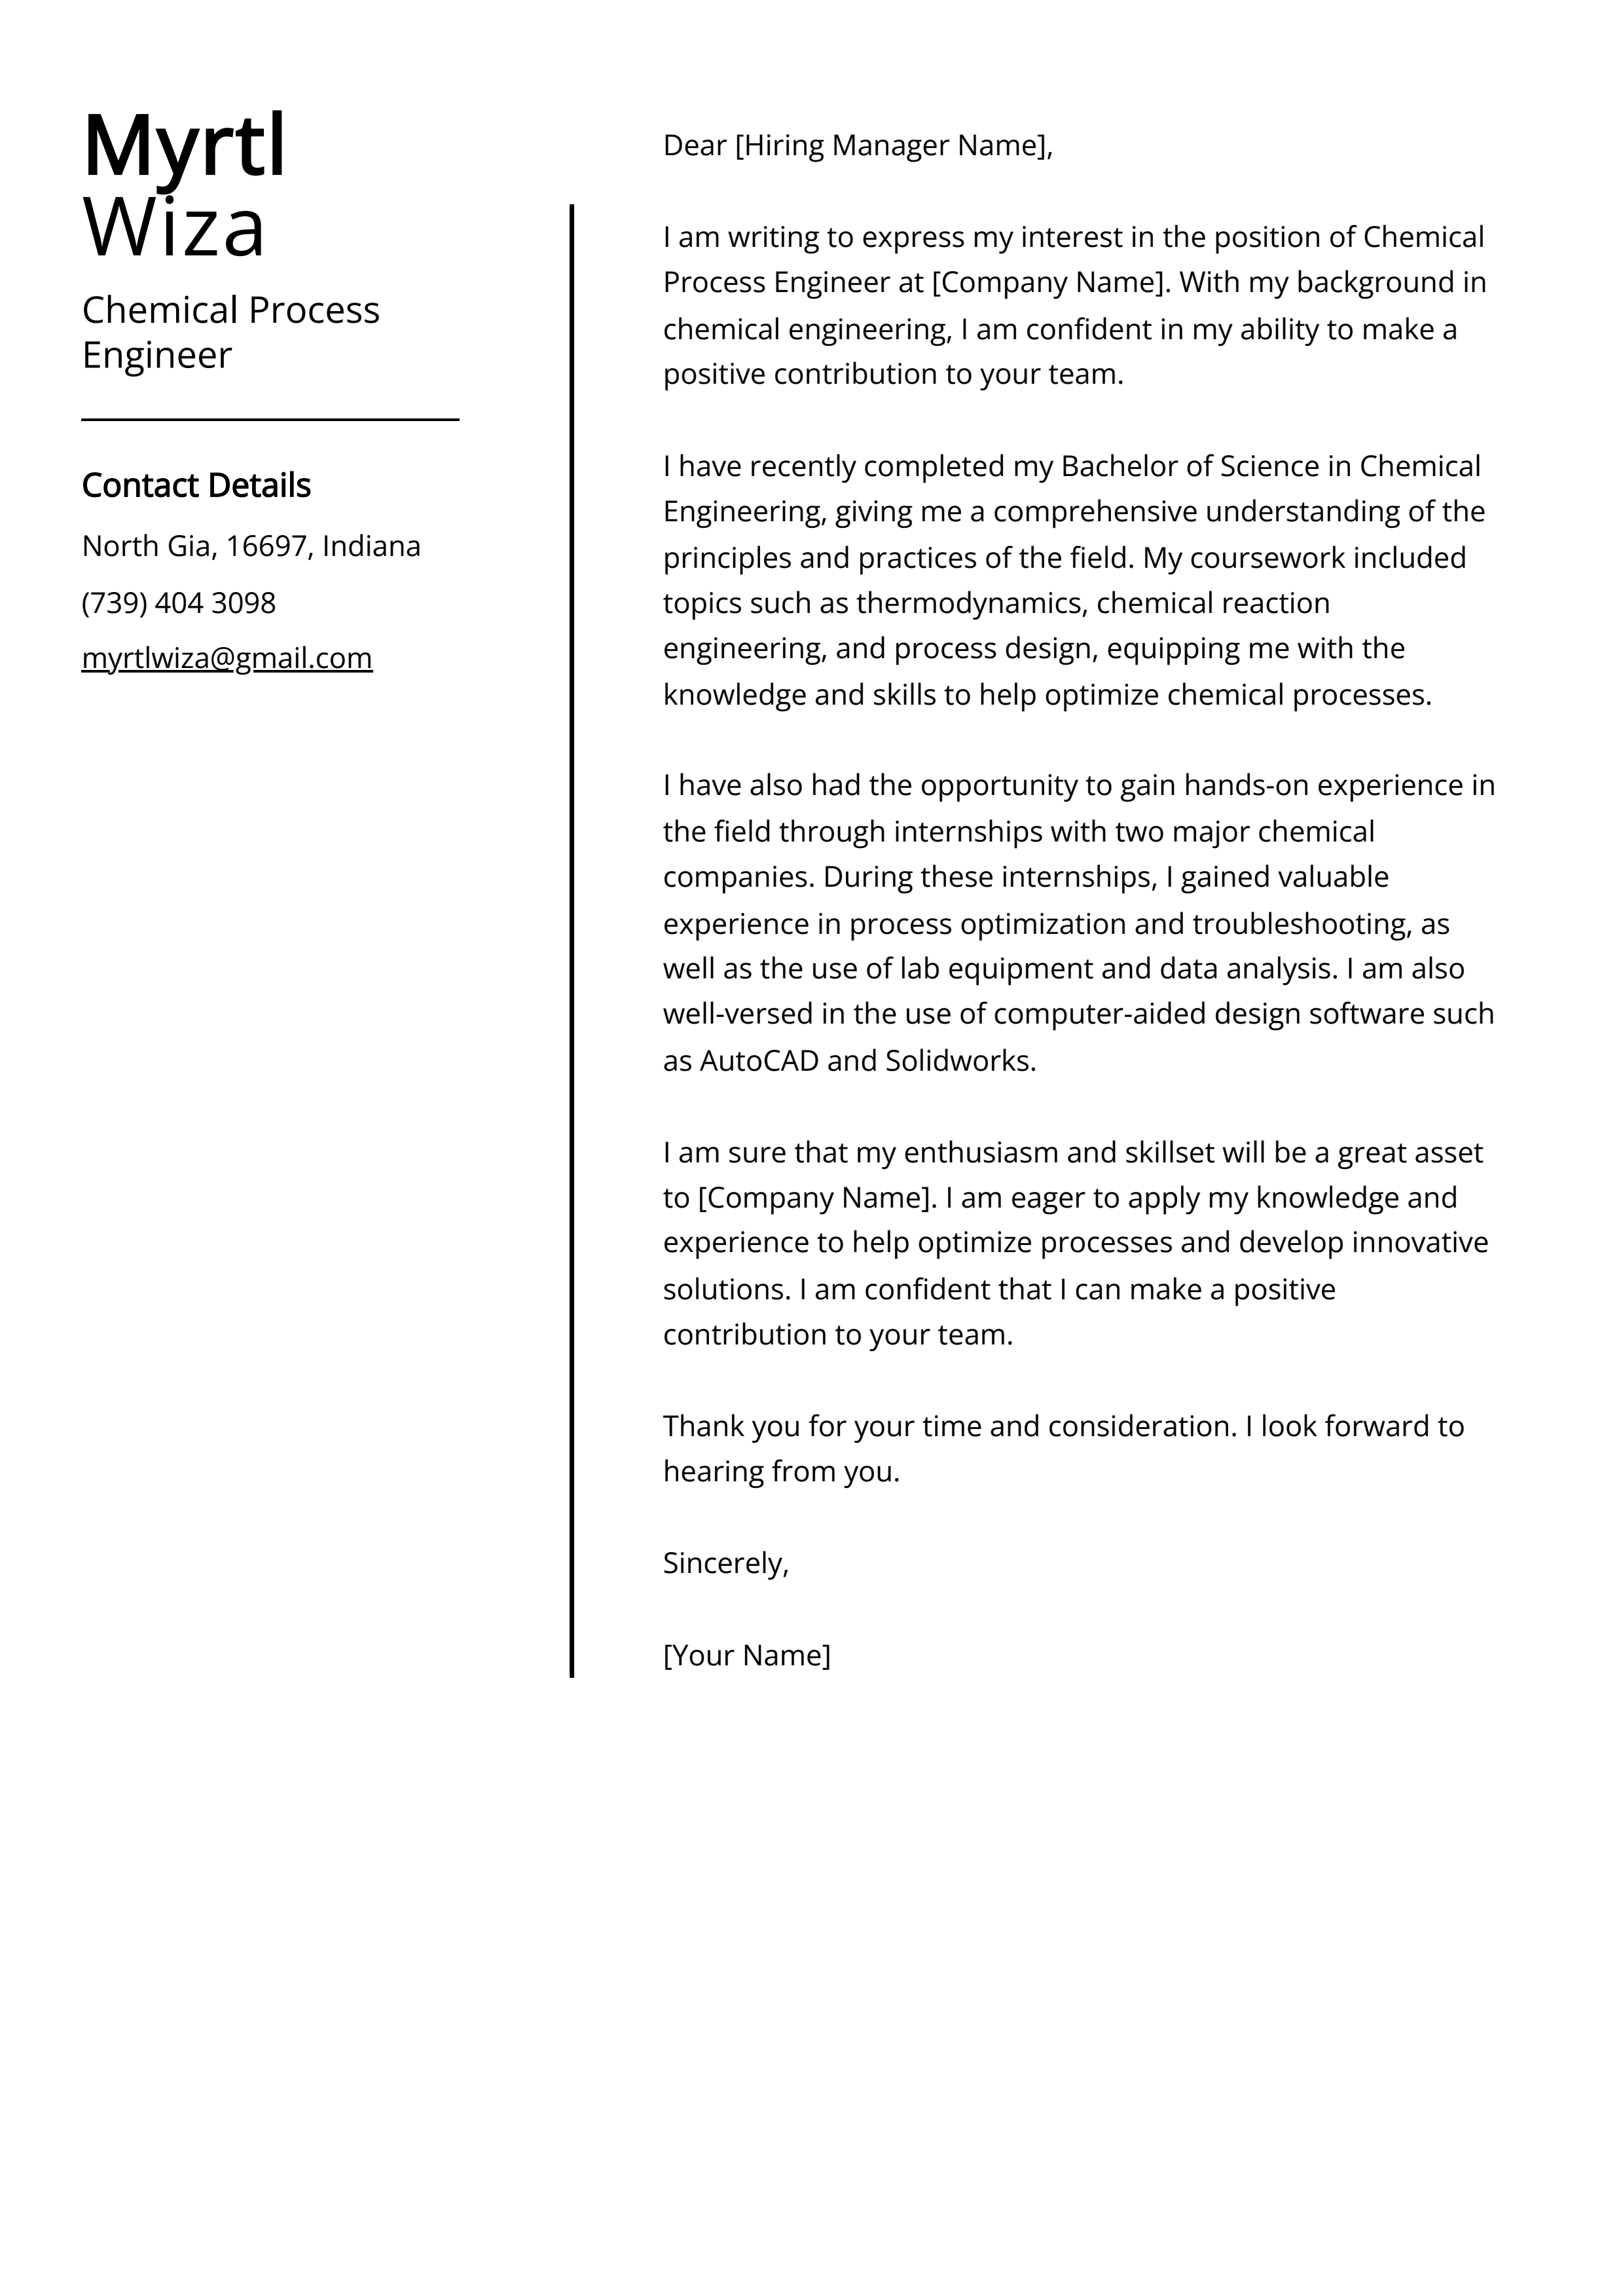 Chemical Process Engineer Cover Letter Example